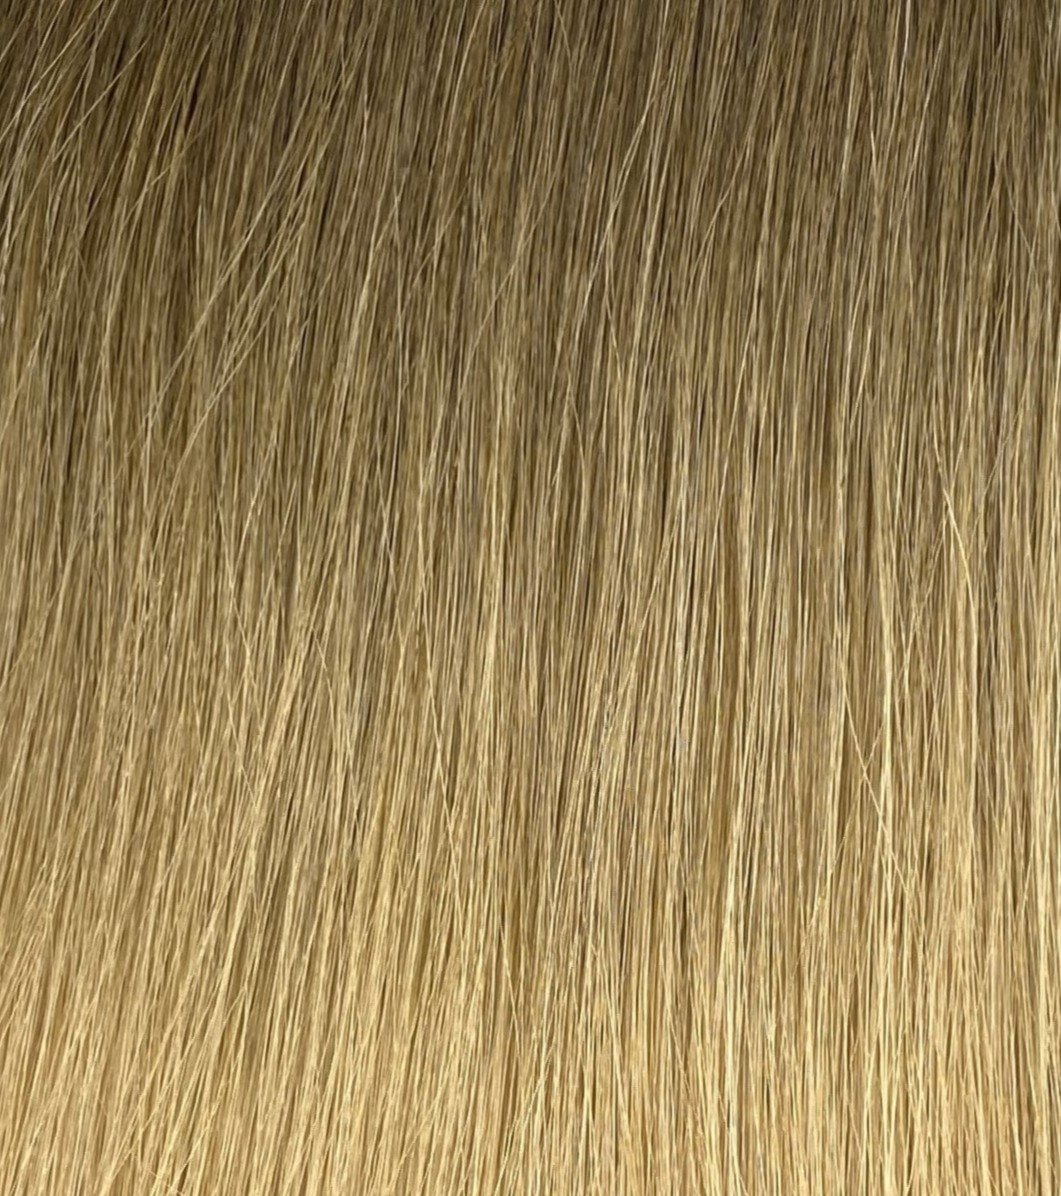 Weft hair extensions #8 & DB4 - Double - 20 inches - Dark Blonde into Dark Golden Blonde Ombre Weft DR Hair Products Co 